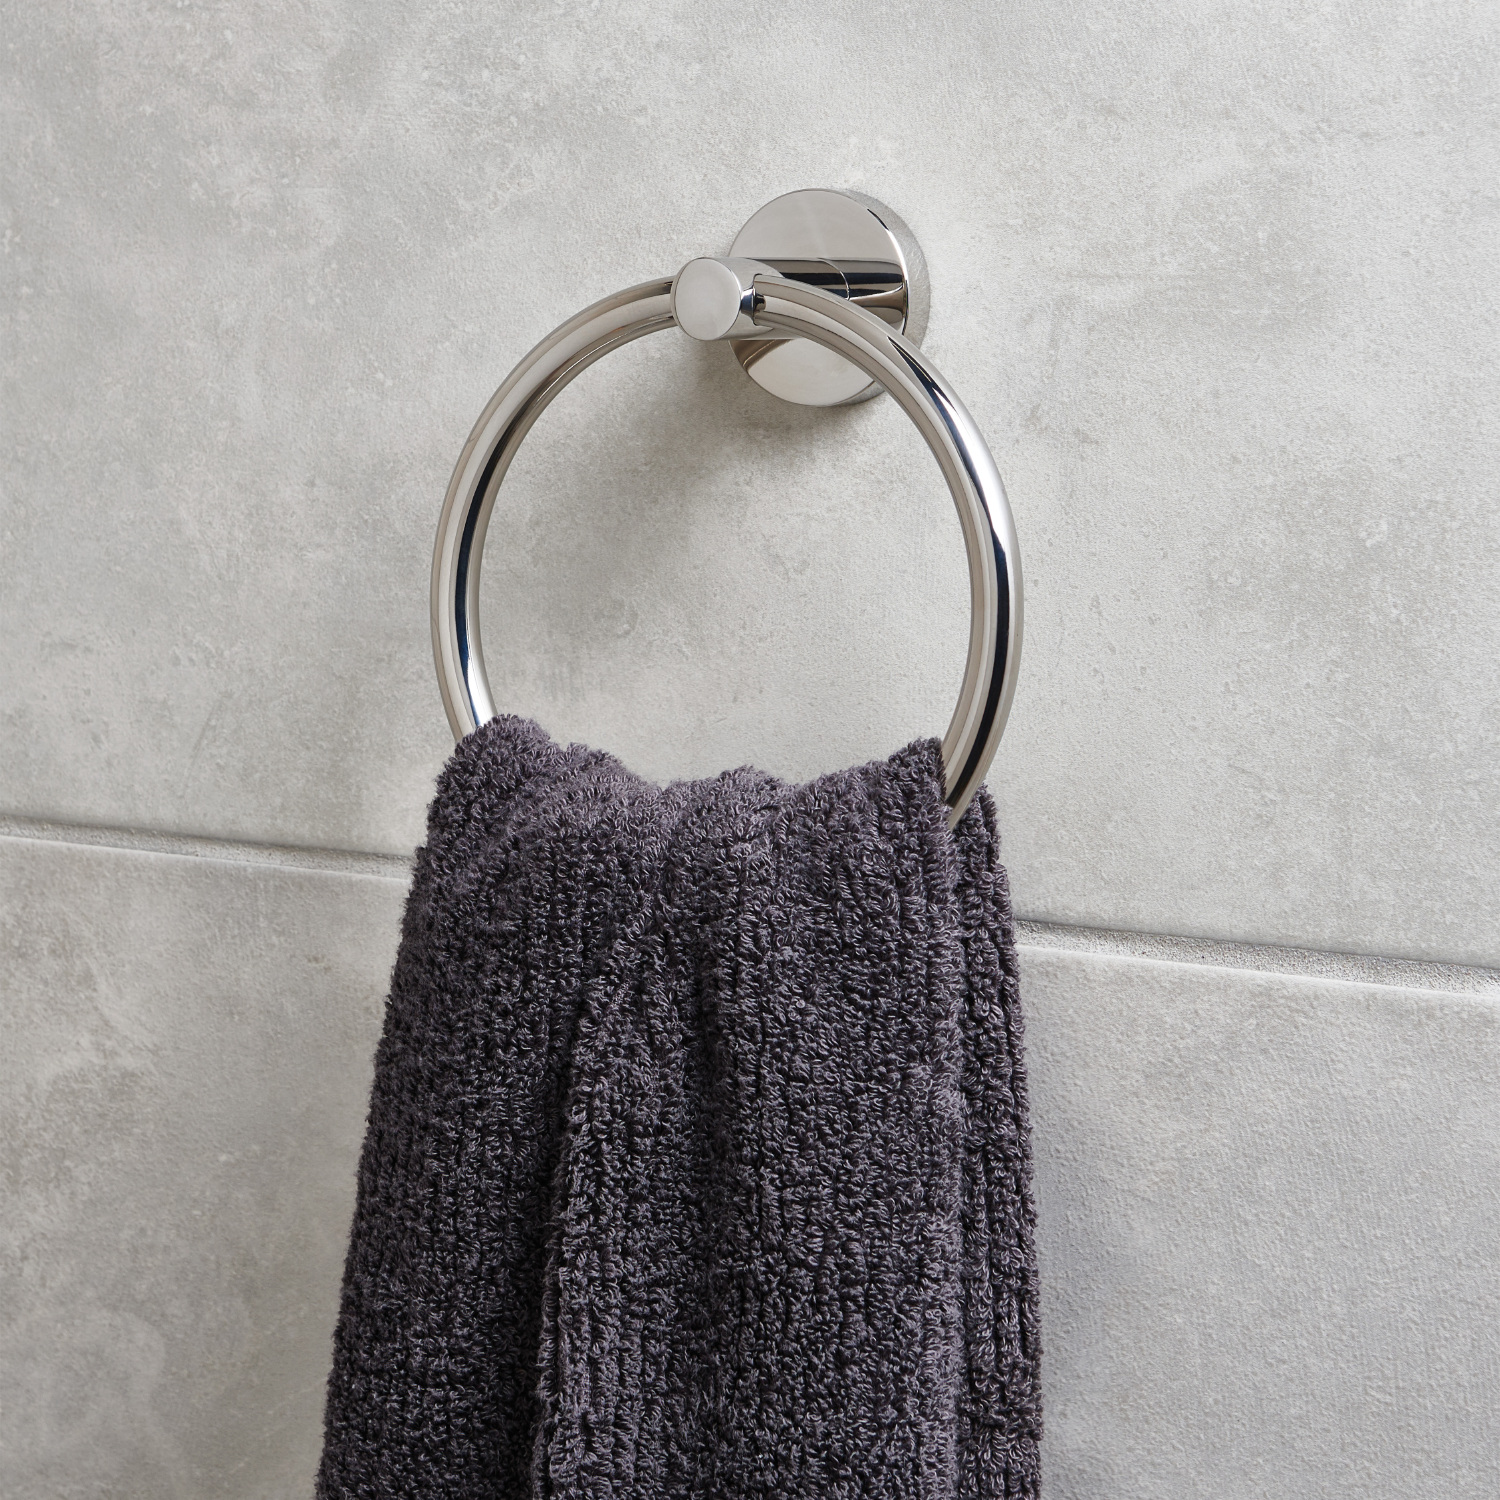 Polished Silver Towel Ring Image 2